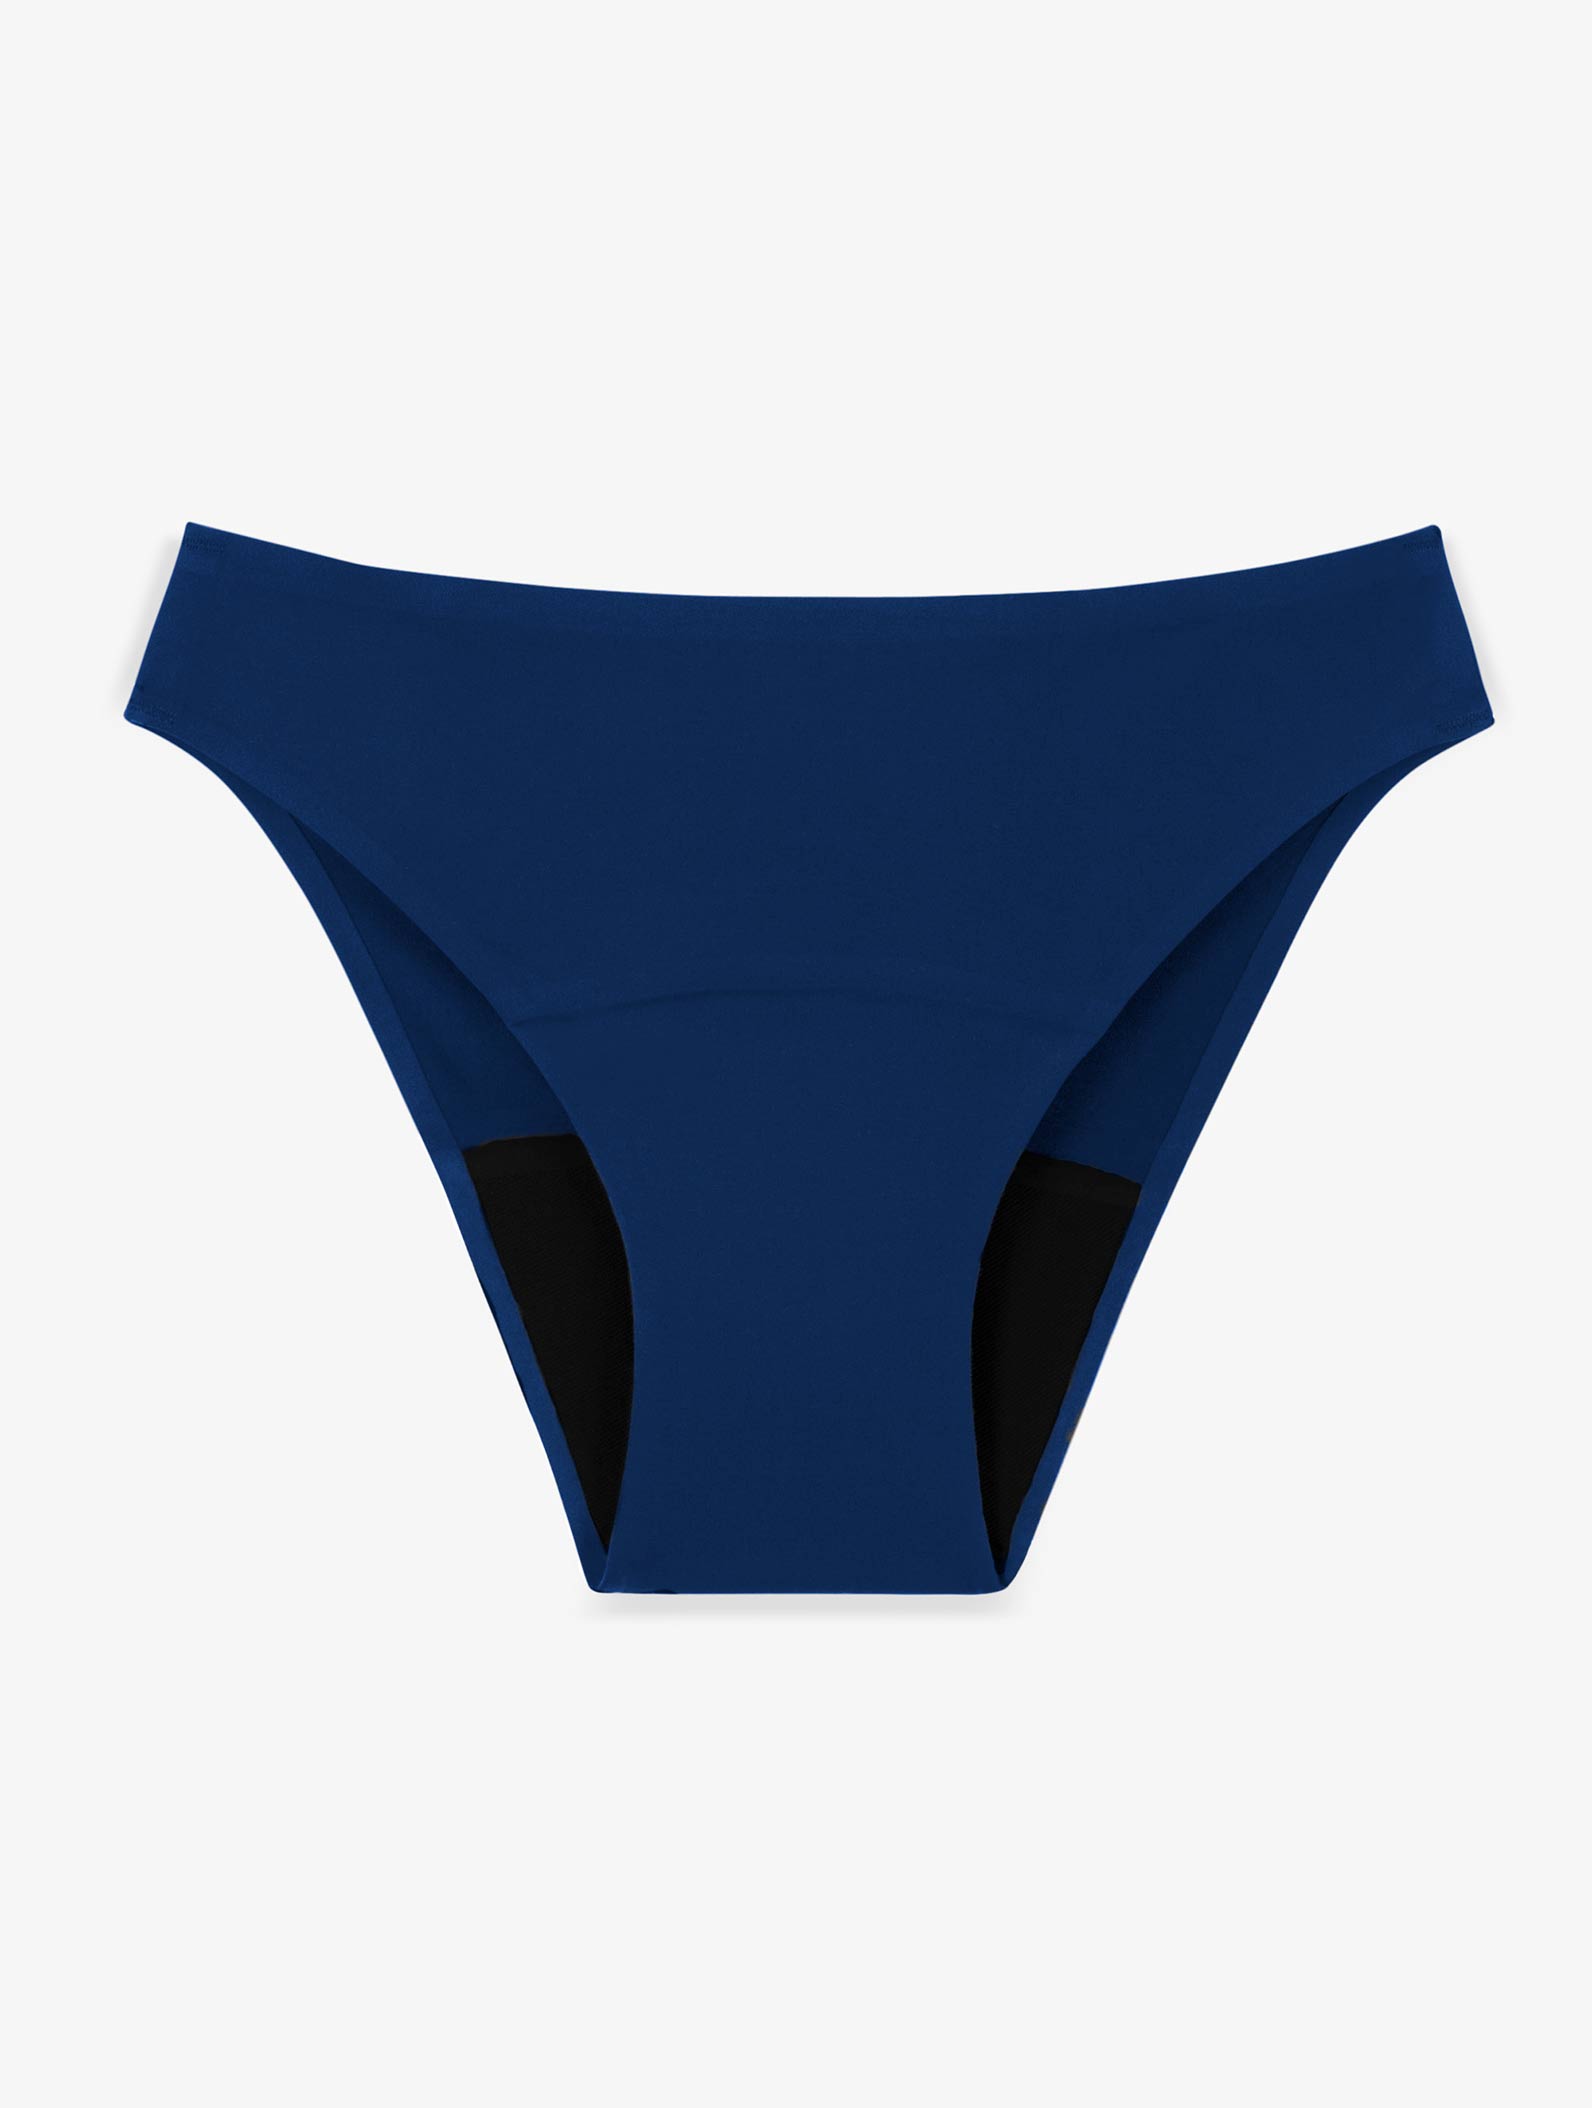 Results for navy blue knickers